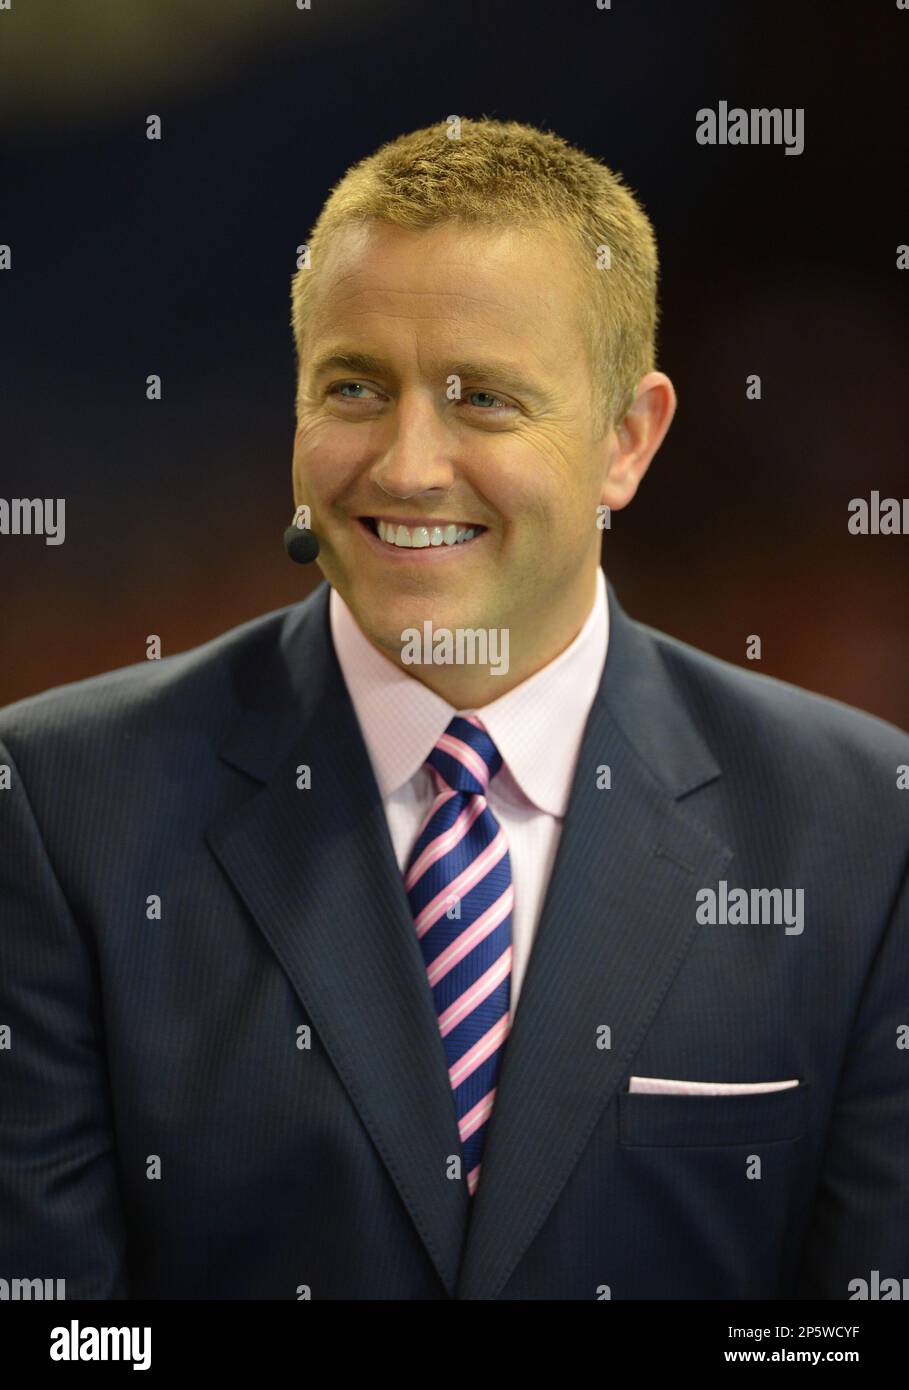 Jan. 2, 2013 - New Orleans, Louisiana, USA - January 02, 2013: ESPN Kirk Herbstreit on the sidelines during the All State Sugar Bowl between the University of Florida Gators and the University of Louisville Cardinals at Mercedes-Benz Superdome in New Orleans, Louisiana. Louisville leads the 1st half against Florida, 24-10. (Cal Sport Media via AP Images) Stock Photo